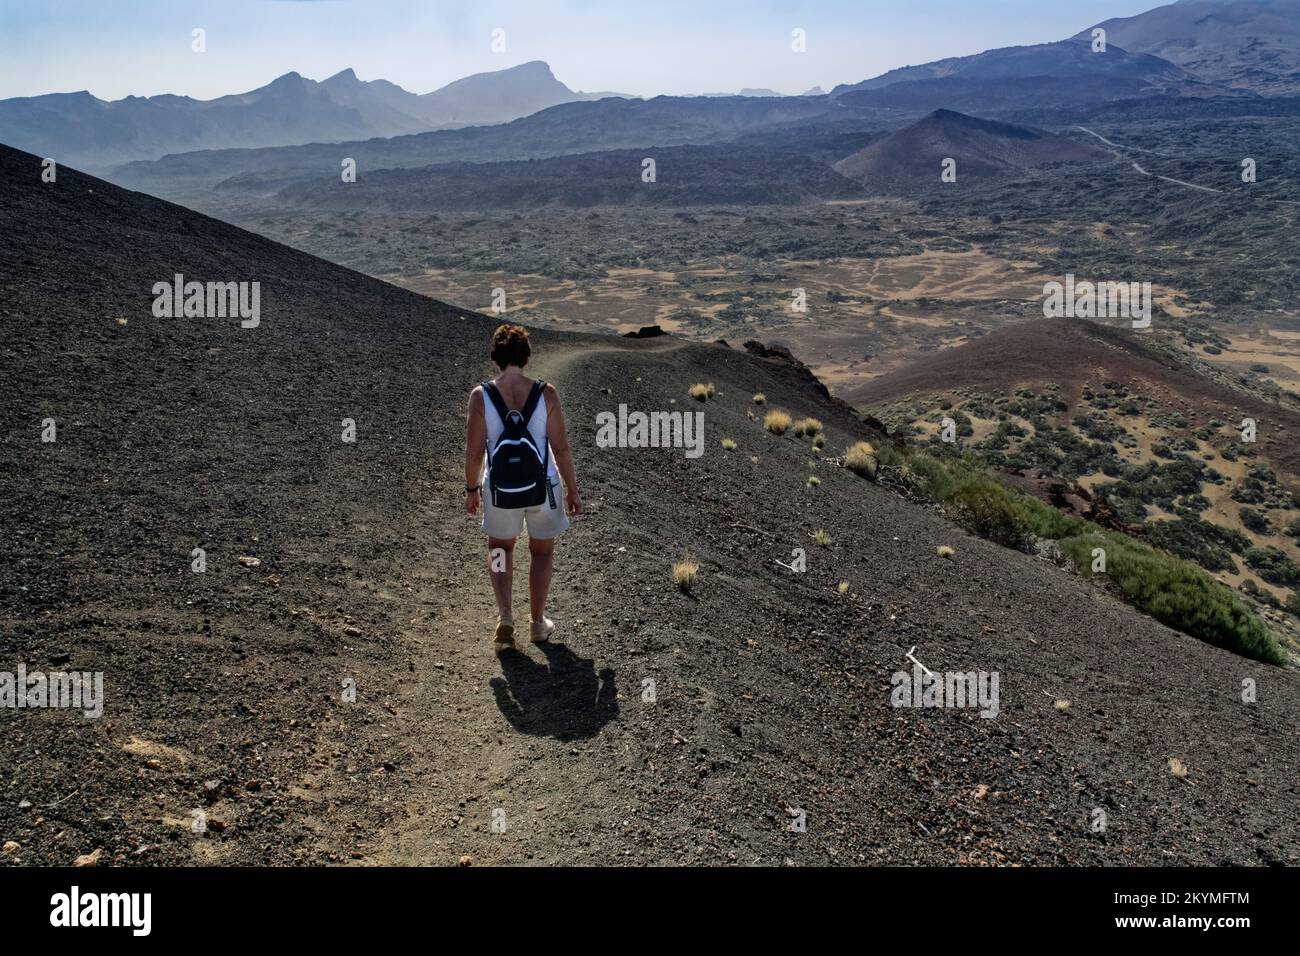 Woman walking on a footpath on the black volcanic cinder cone of Montana de las Arenas Negras, Mount Teide National park, Tenerife, Canary Islands Oct. Stock Photo